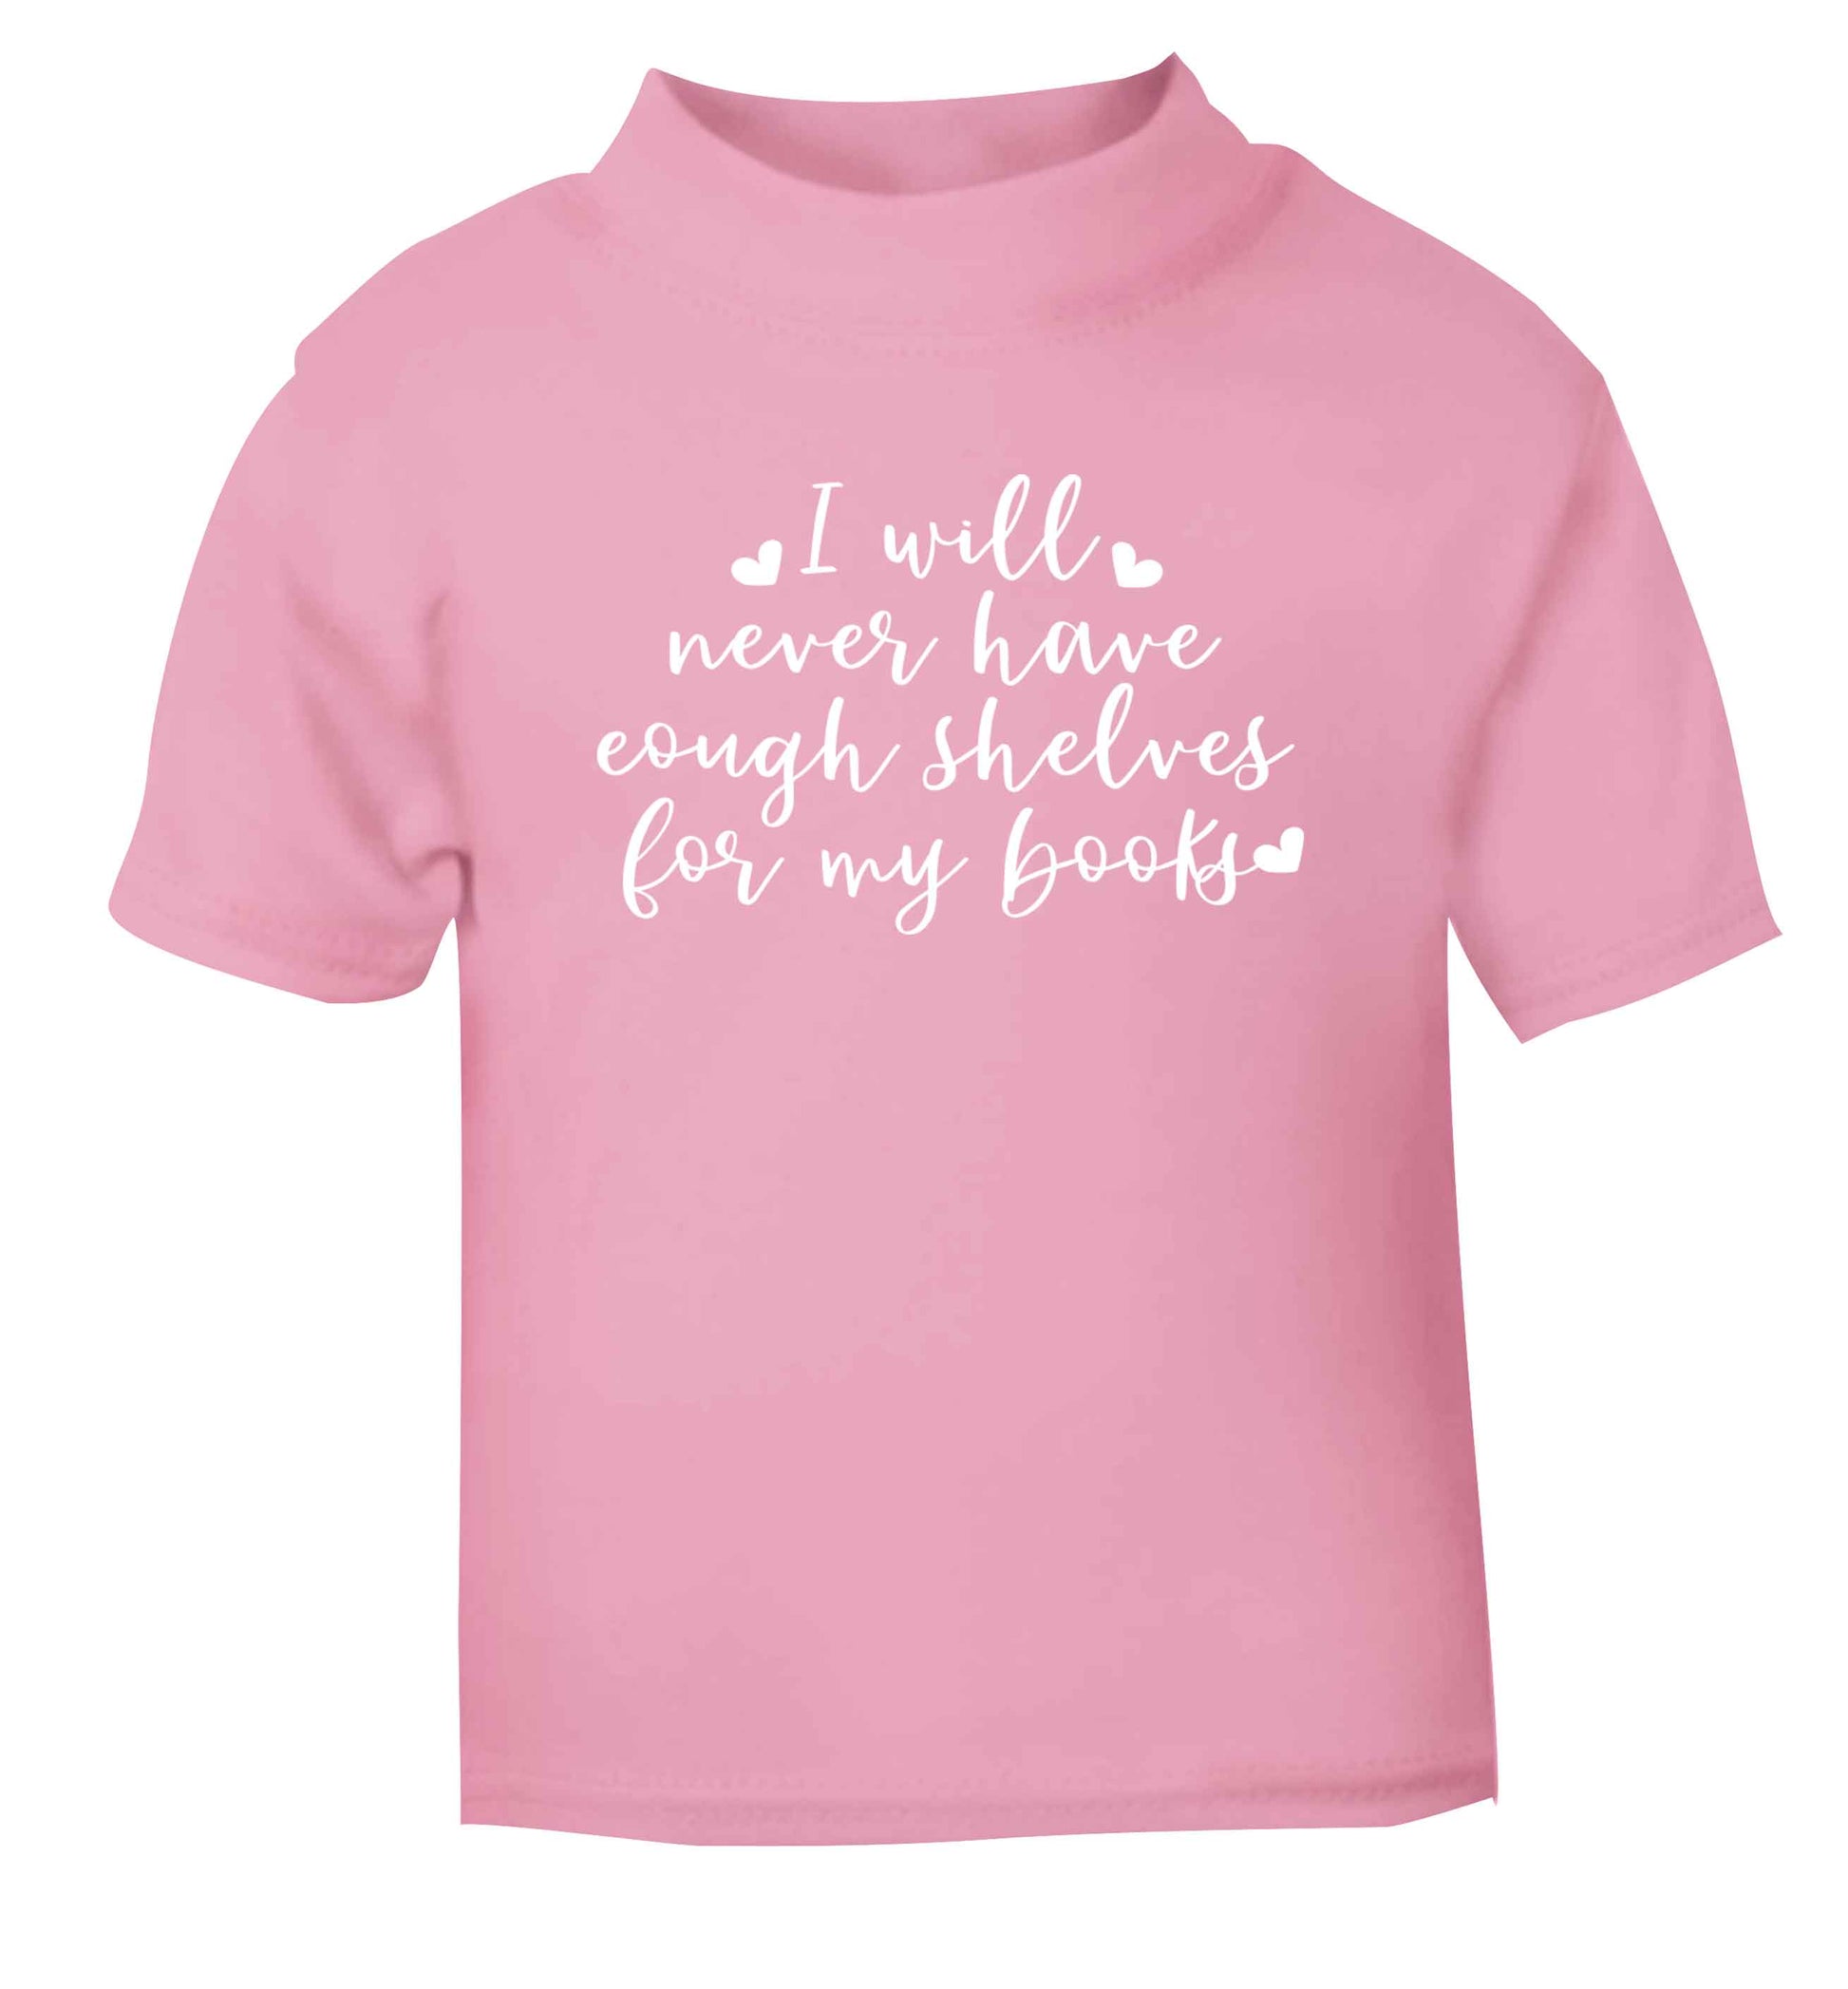 I will never have enough shelves for my books light pink Baby Toddler Tshirt 2 Years